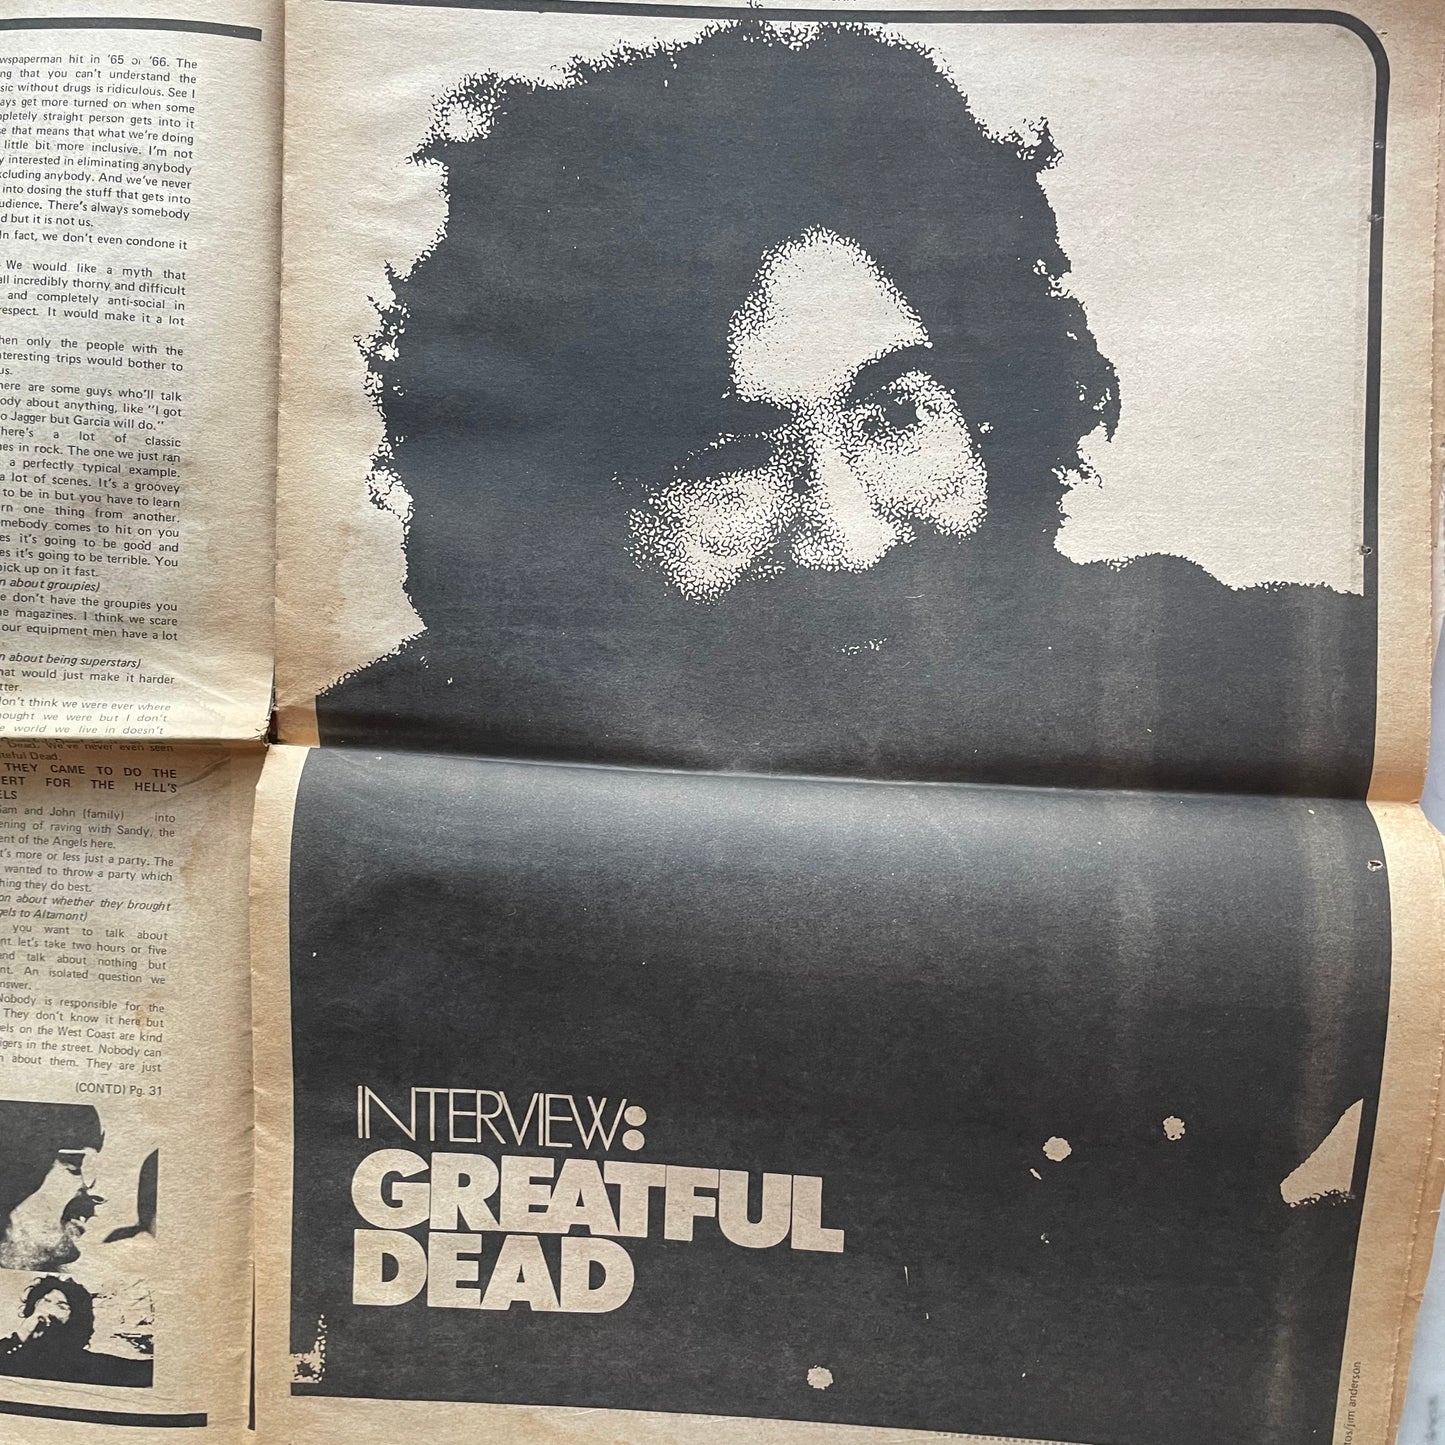 Changes Magazine, January 15, 1971, Vol. 2, Issue 19